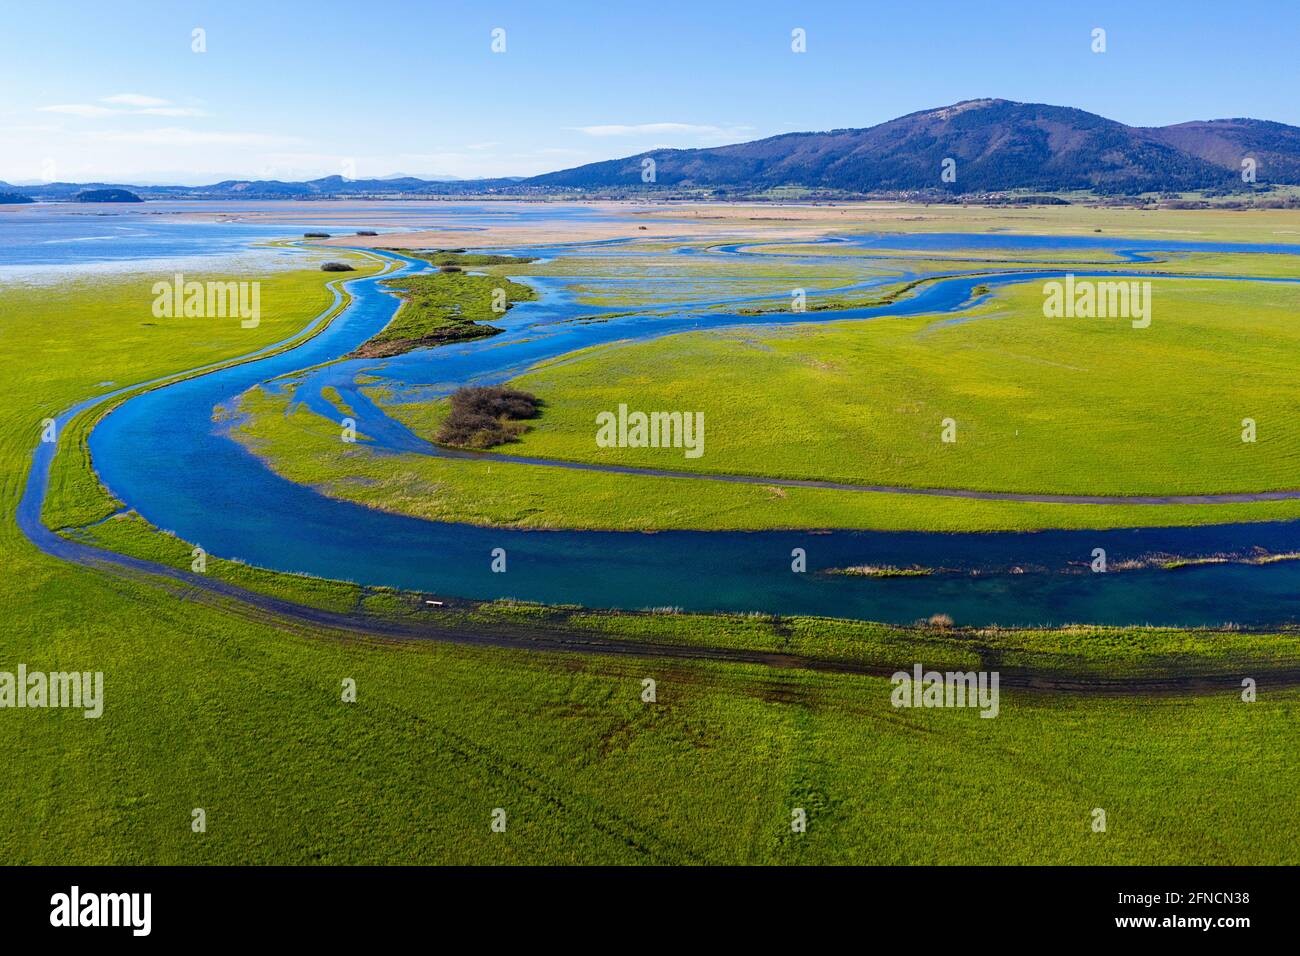 Top aerial view of tributary that flows into Cerknica Lake, taken by drone, Slovenia Stock Photo